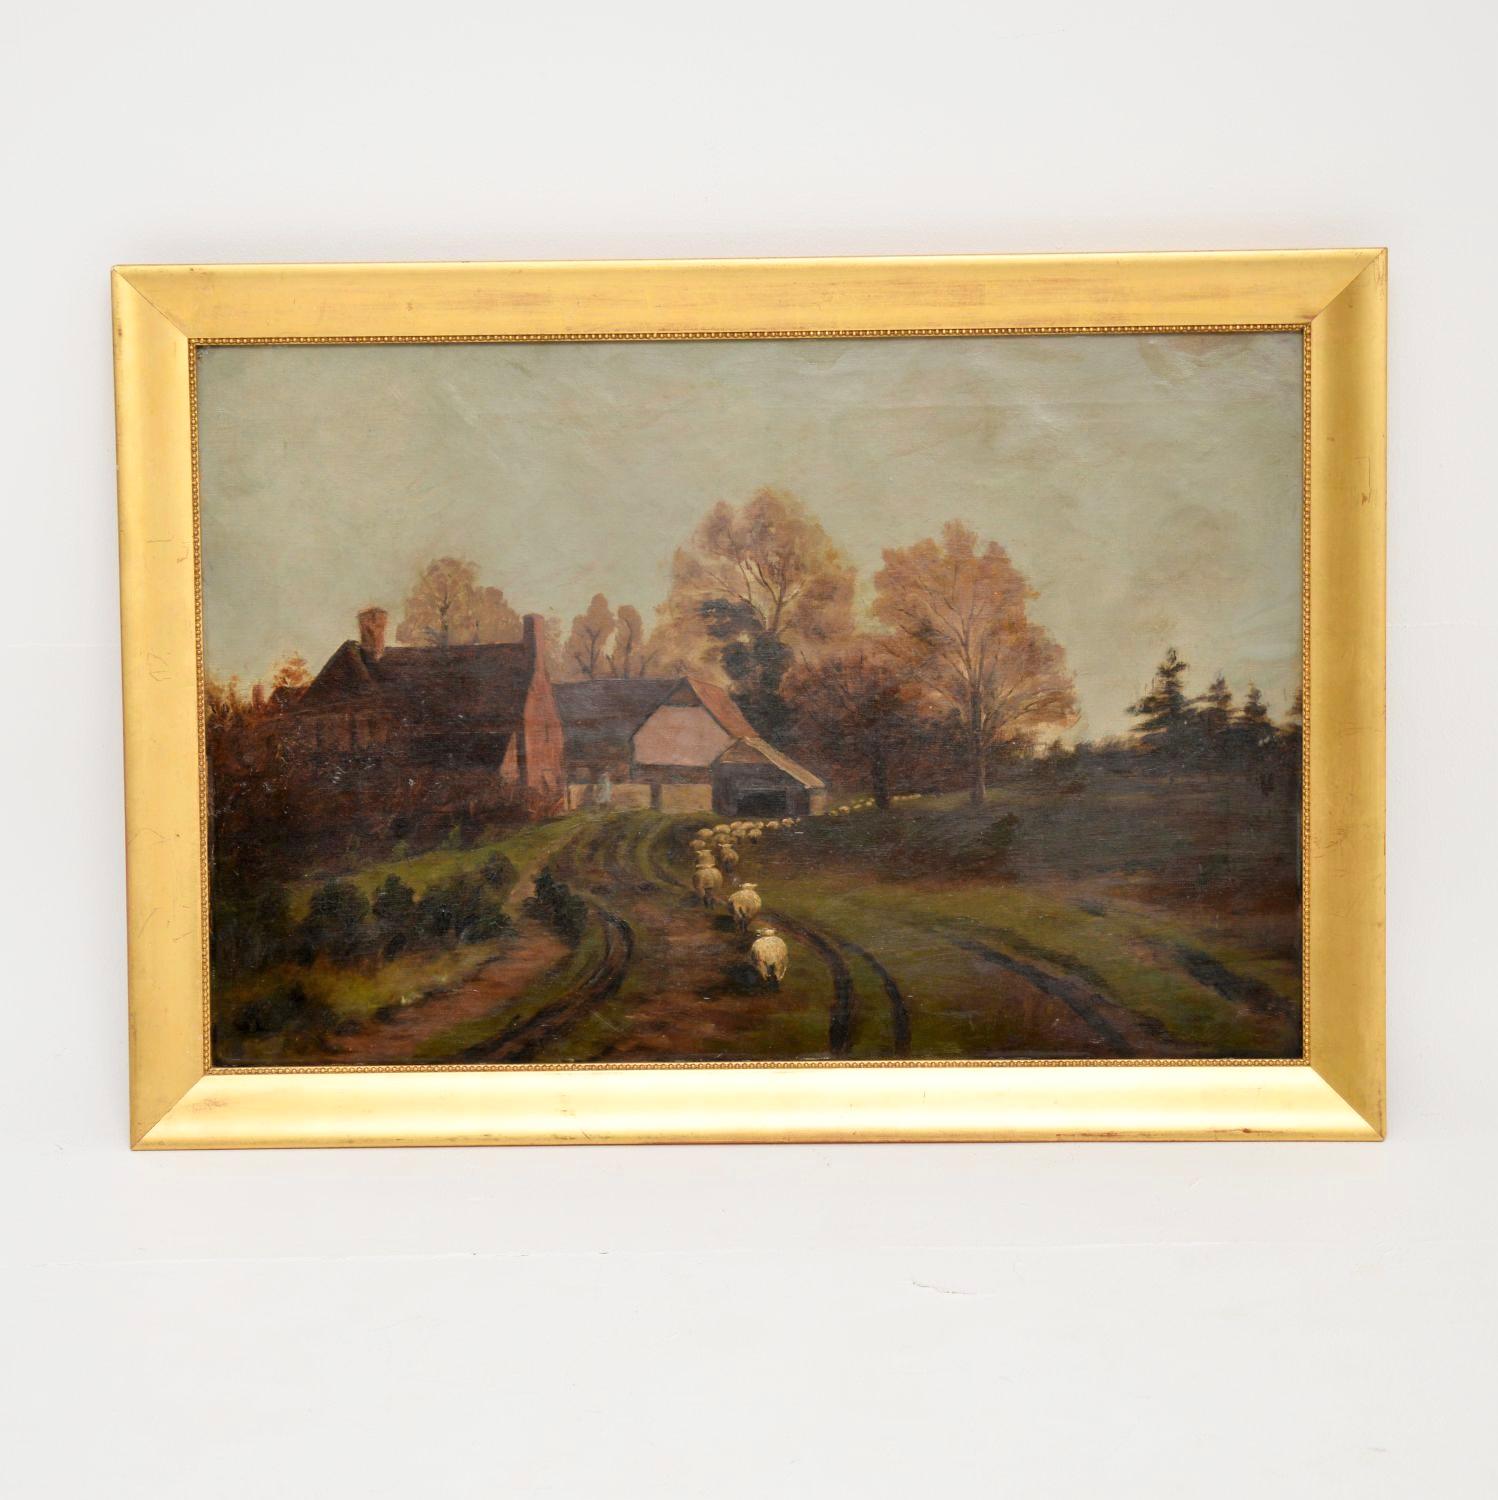 A charming antique Victorian landscape oil painting. This is English, it dates from around the 1860-1880 period.

It is beautifully executed and depicts a countryside scene of sheep being herded along a country road.

It has darkened slightly